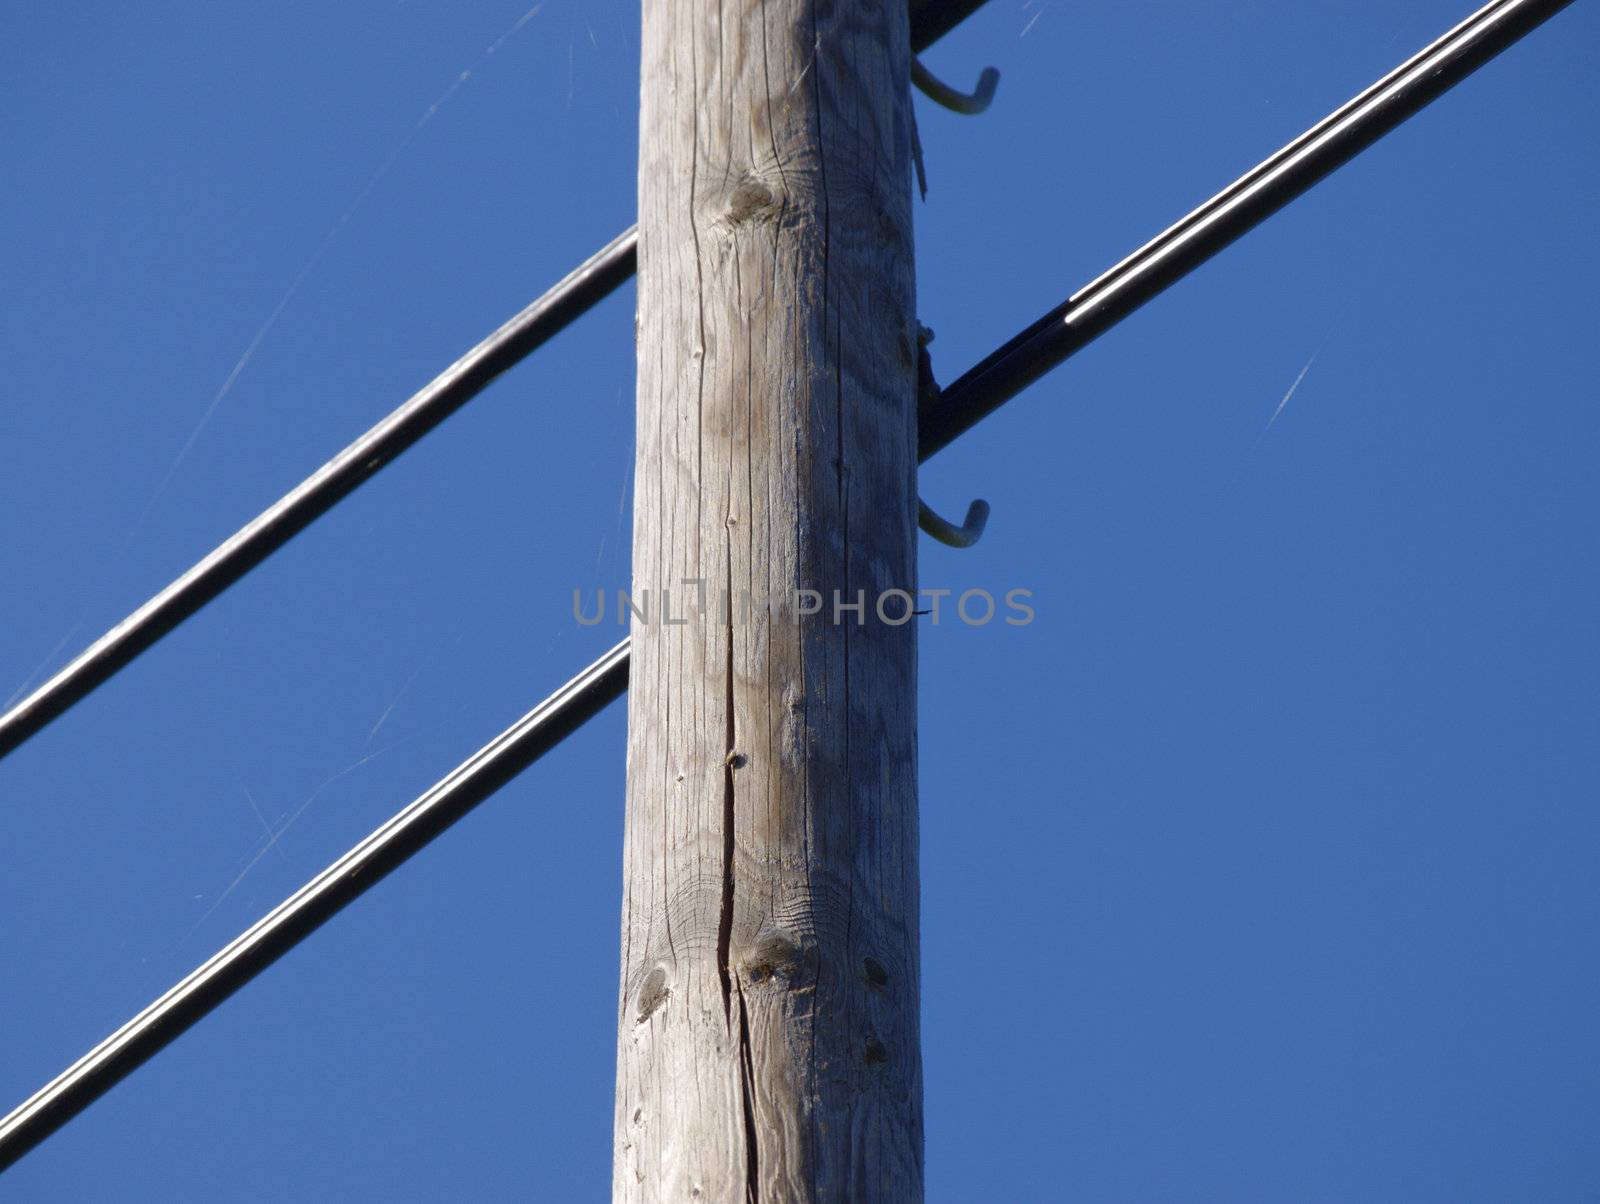 structure of wood on the electric pole